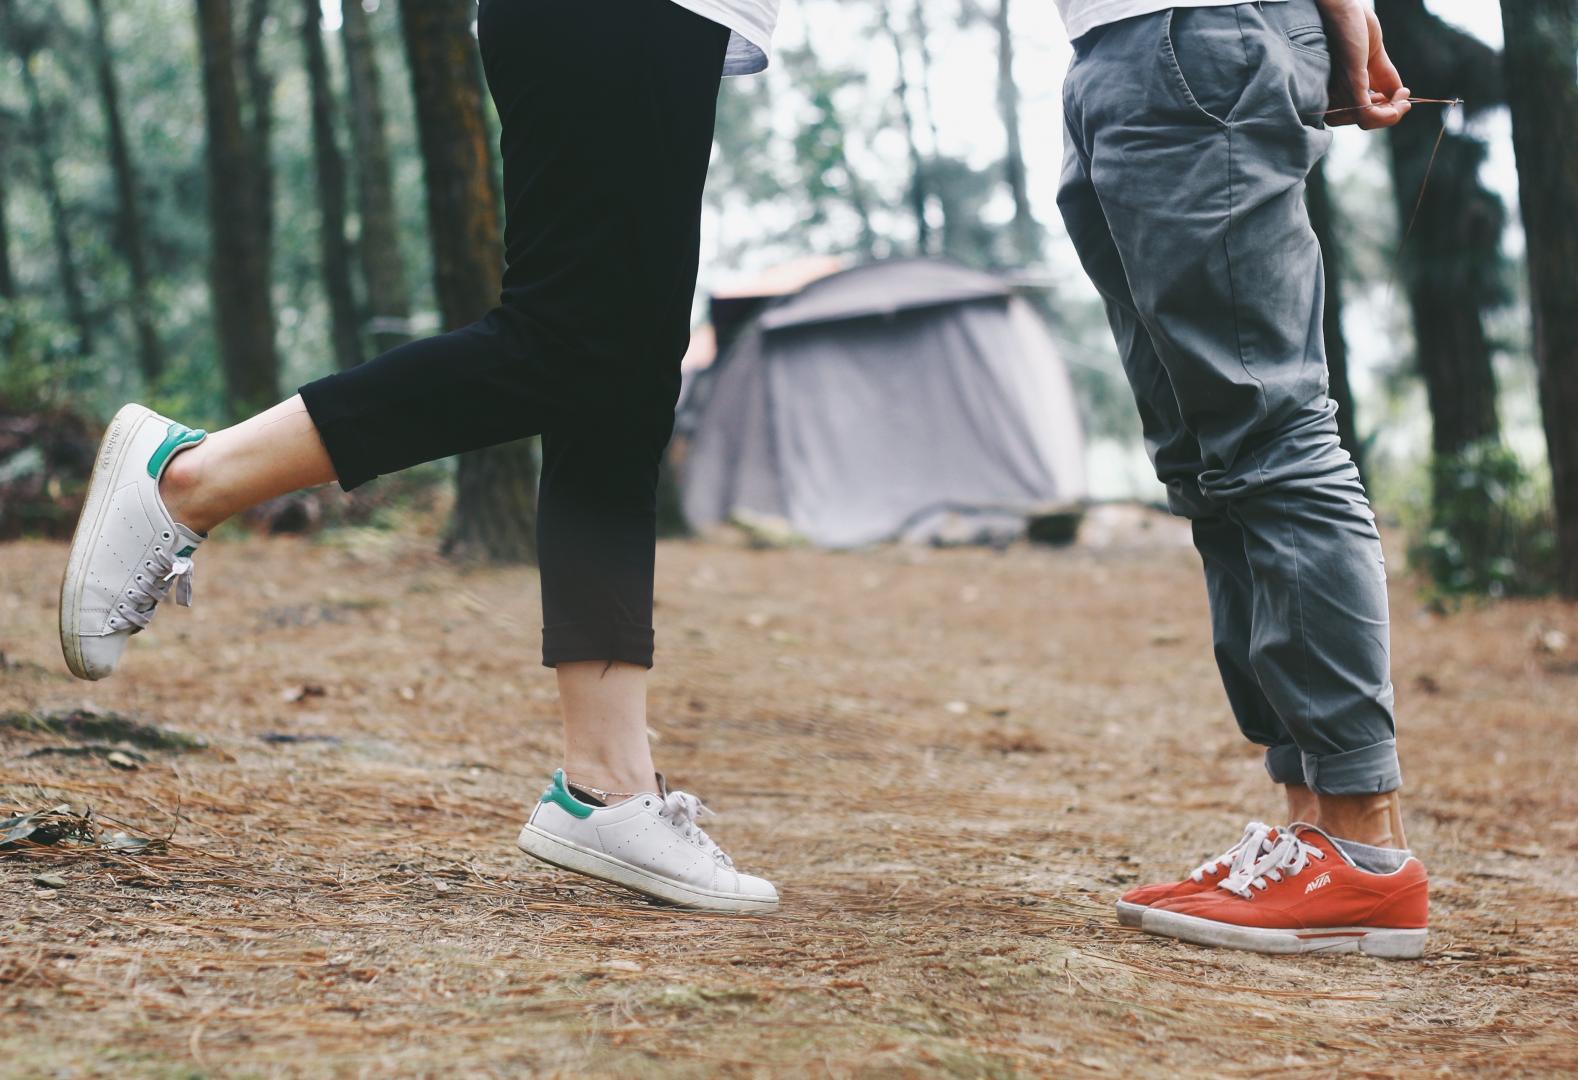 Camping Honeymoons For Outdoorsy Couples